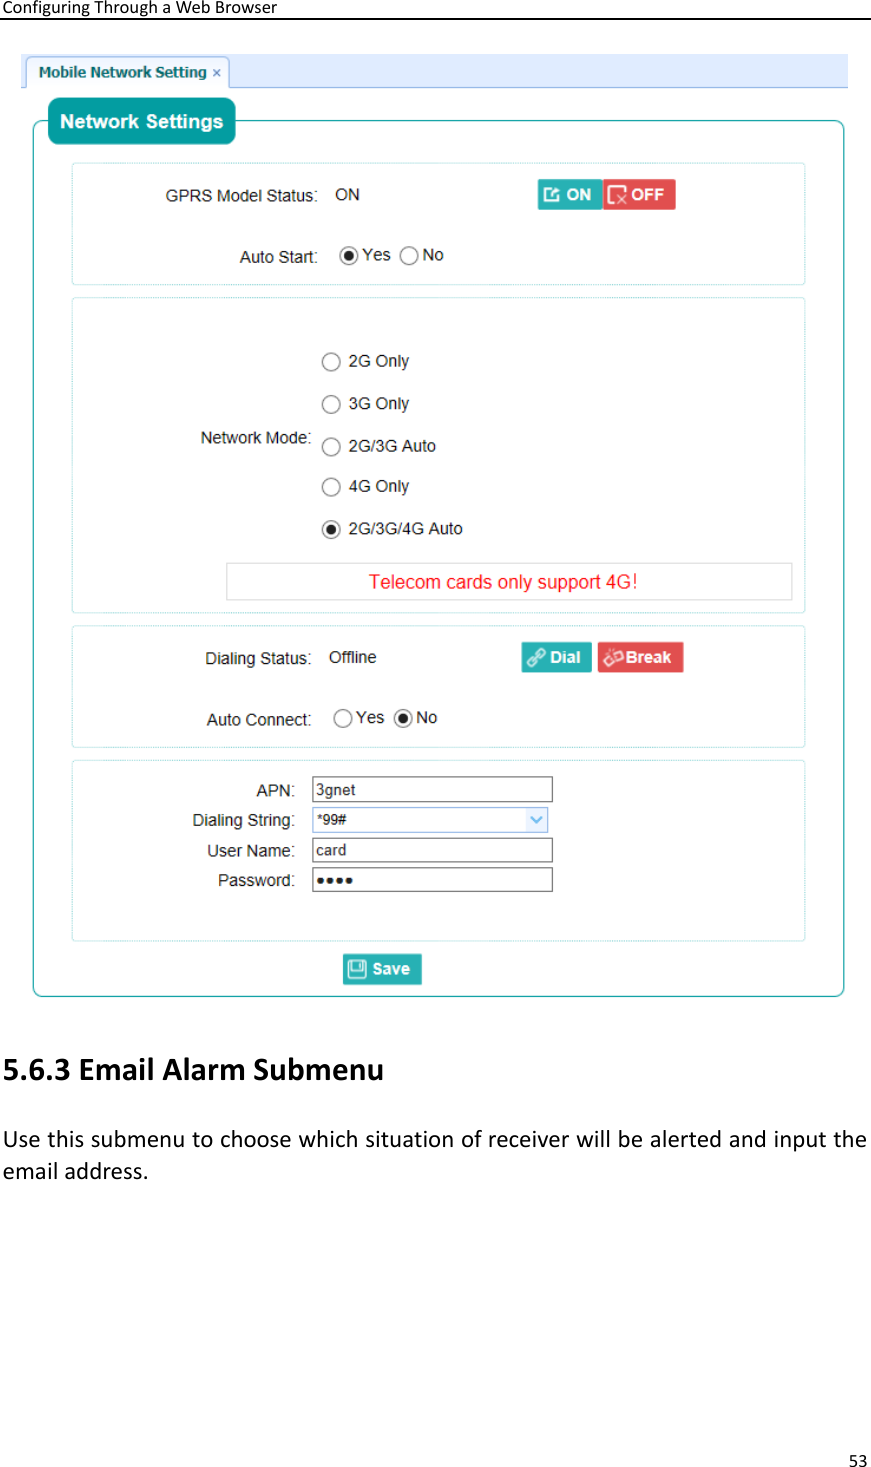 Configuring Through a Web Browser 53   5.6.3 Email Alarm Submenu Use this submenu to choose which situation of receiver will be alerted and input the email address. 